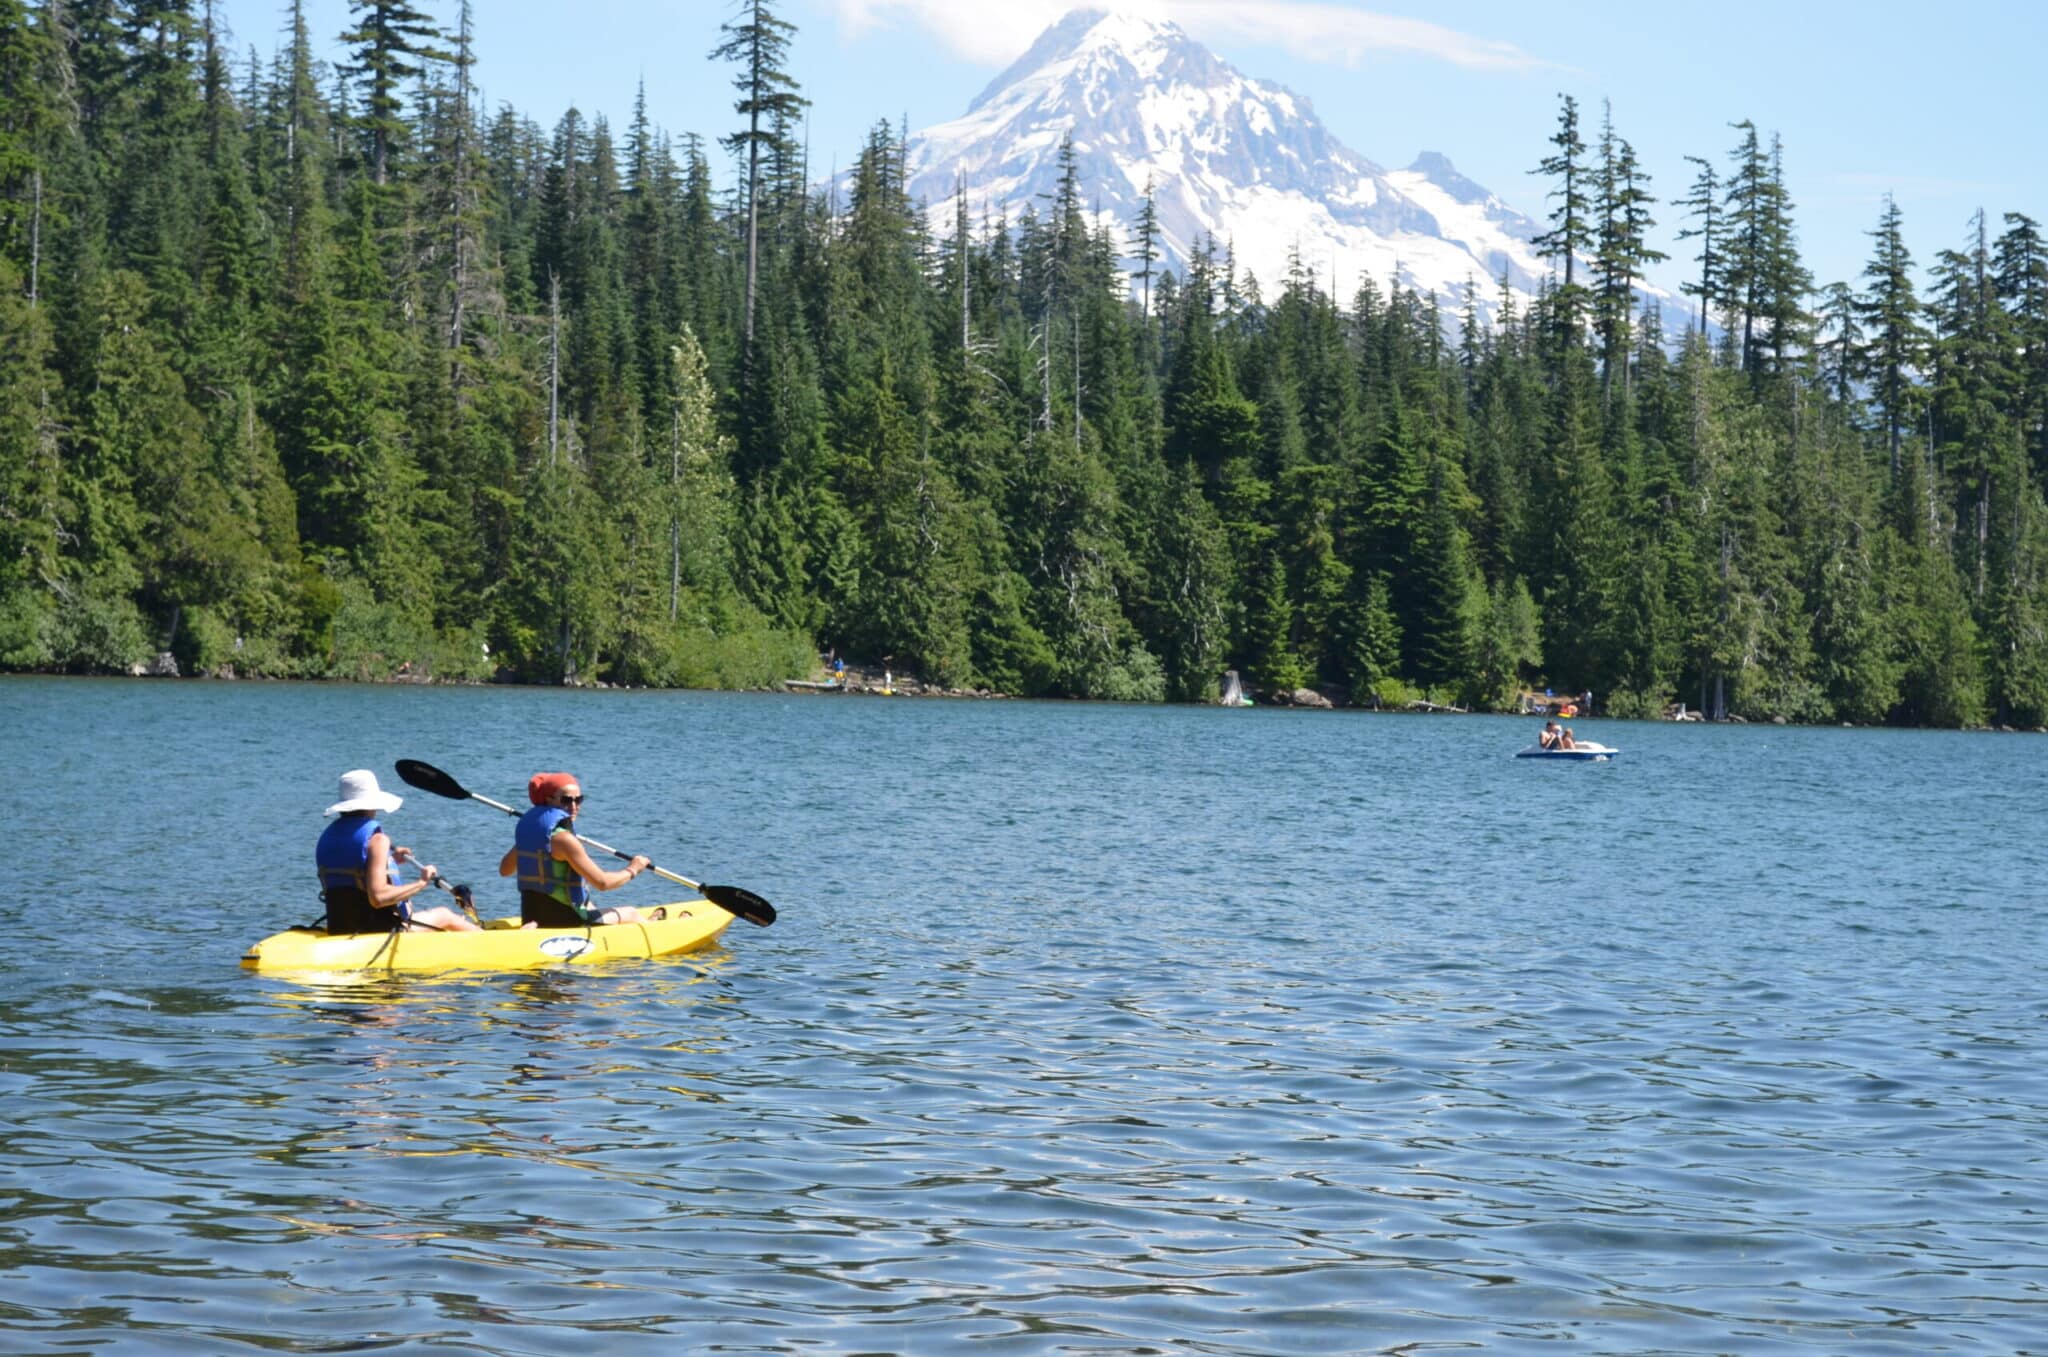 Kayakers on Lost Lake with Mt Hood in the background